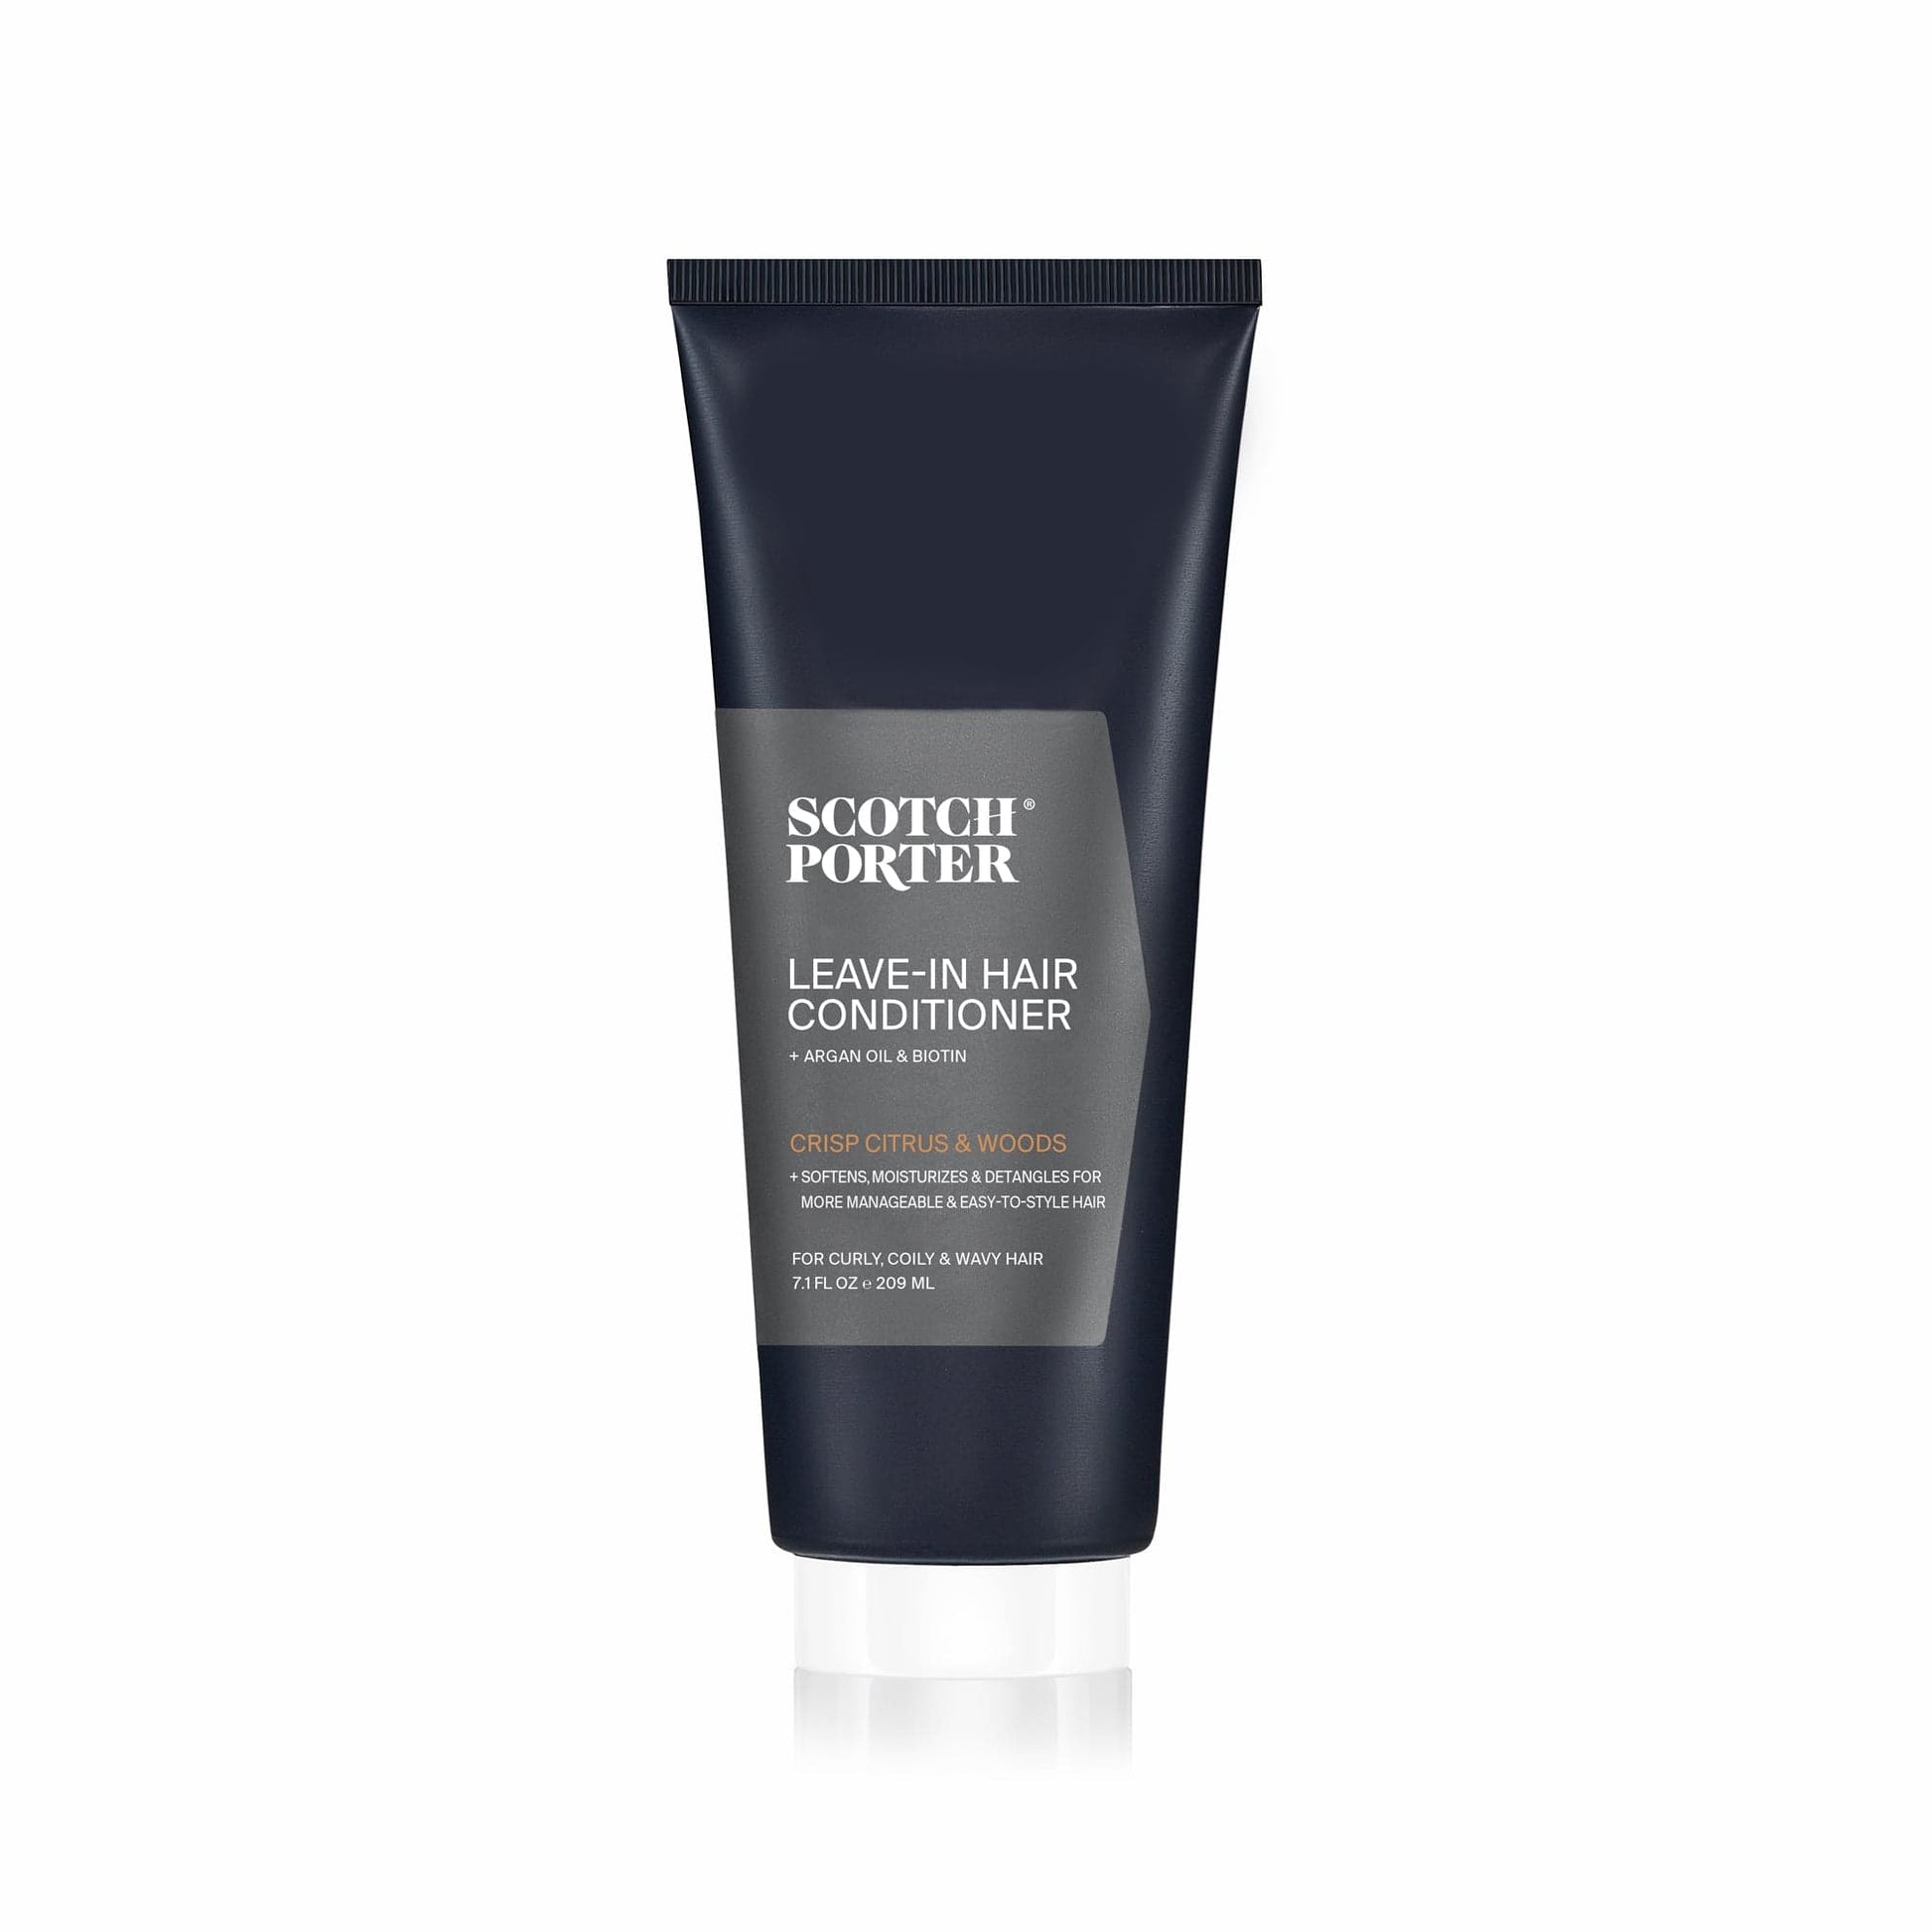 SCOTCH PORTER BRAND Hair Care Products Moisture Rich Leave-In Hair Conditioner